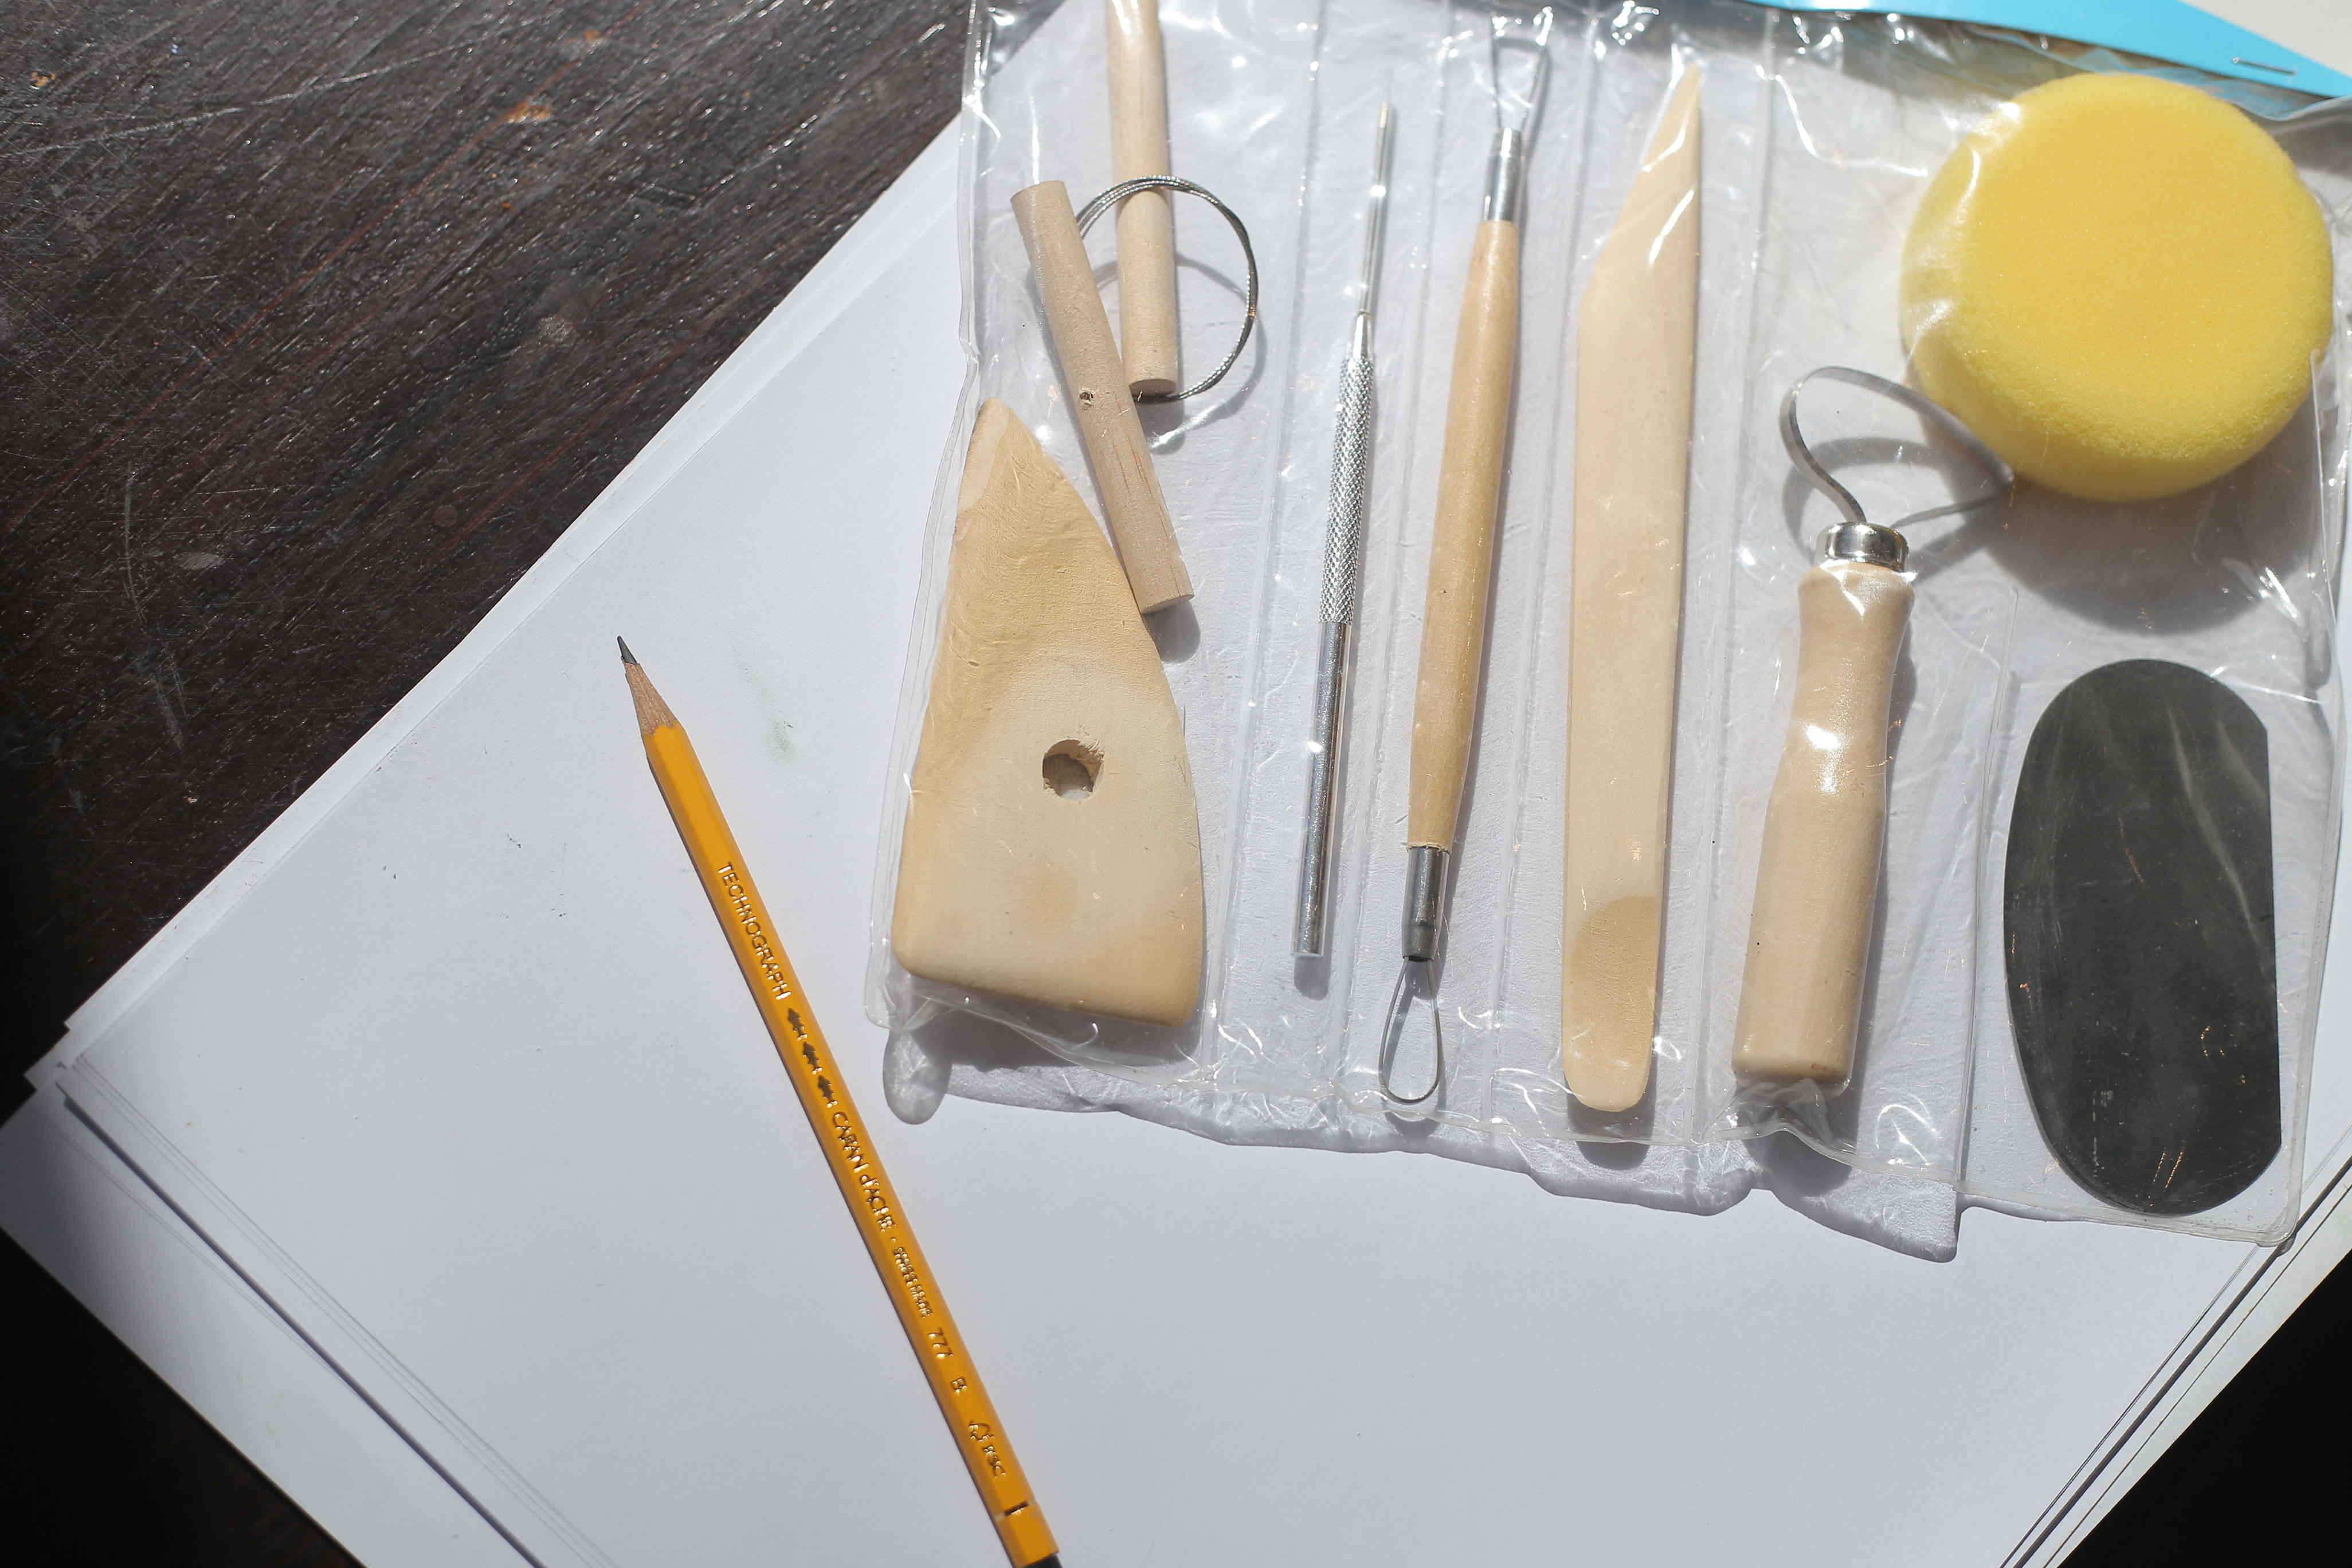 This basic pottery tool set costs P239.